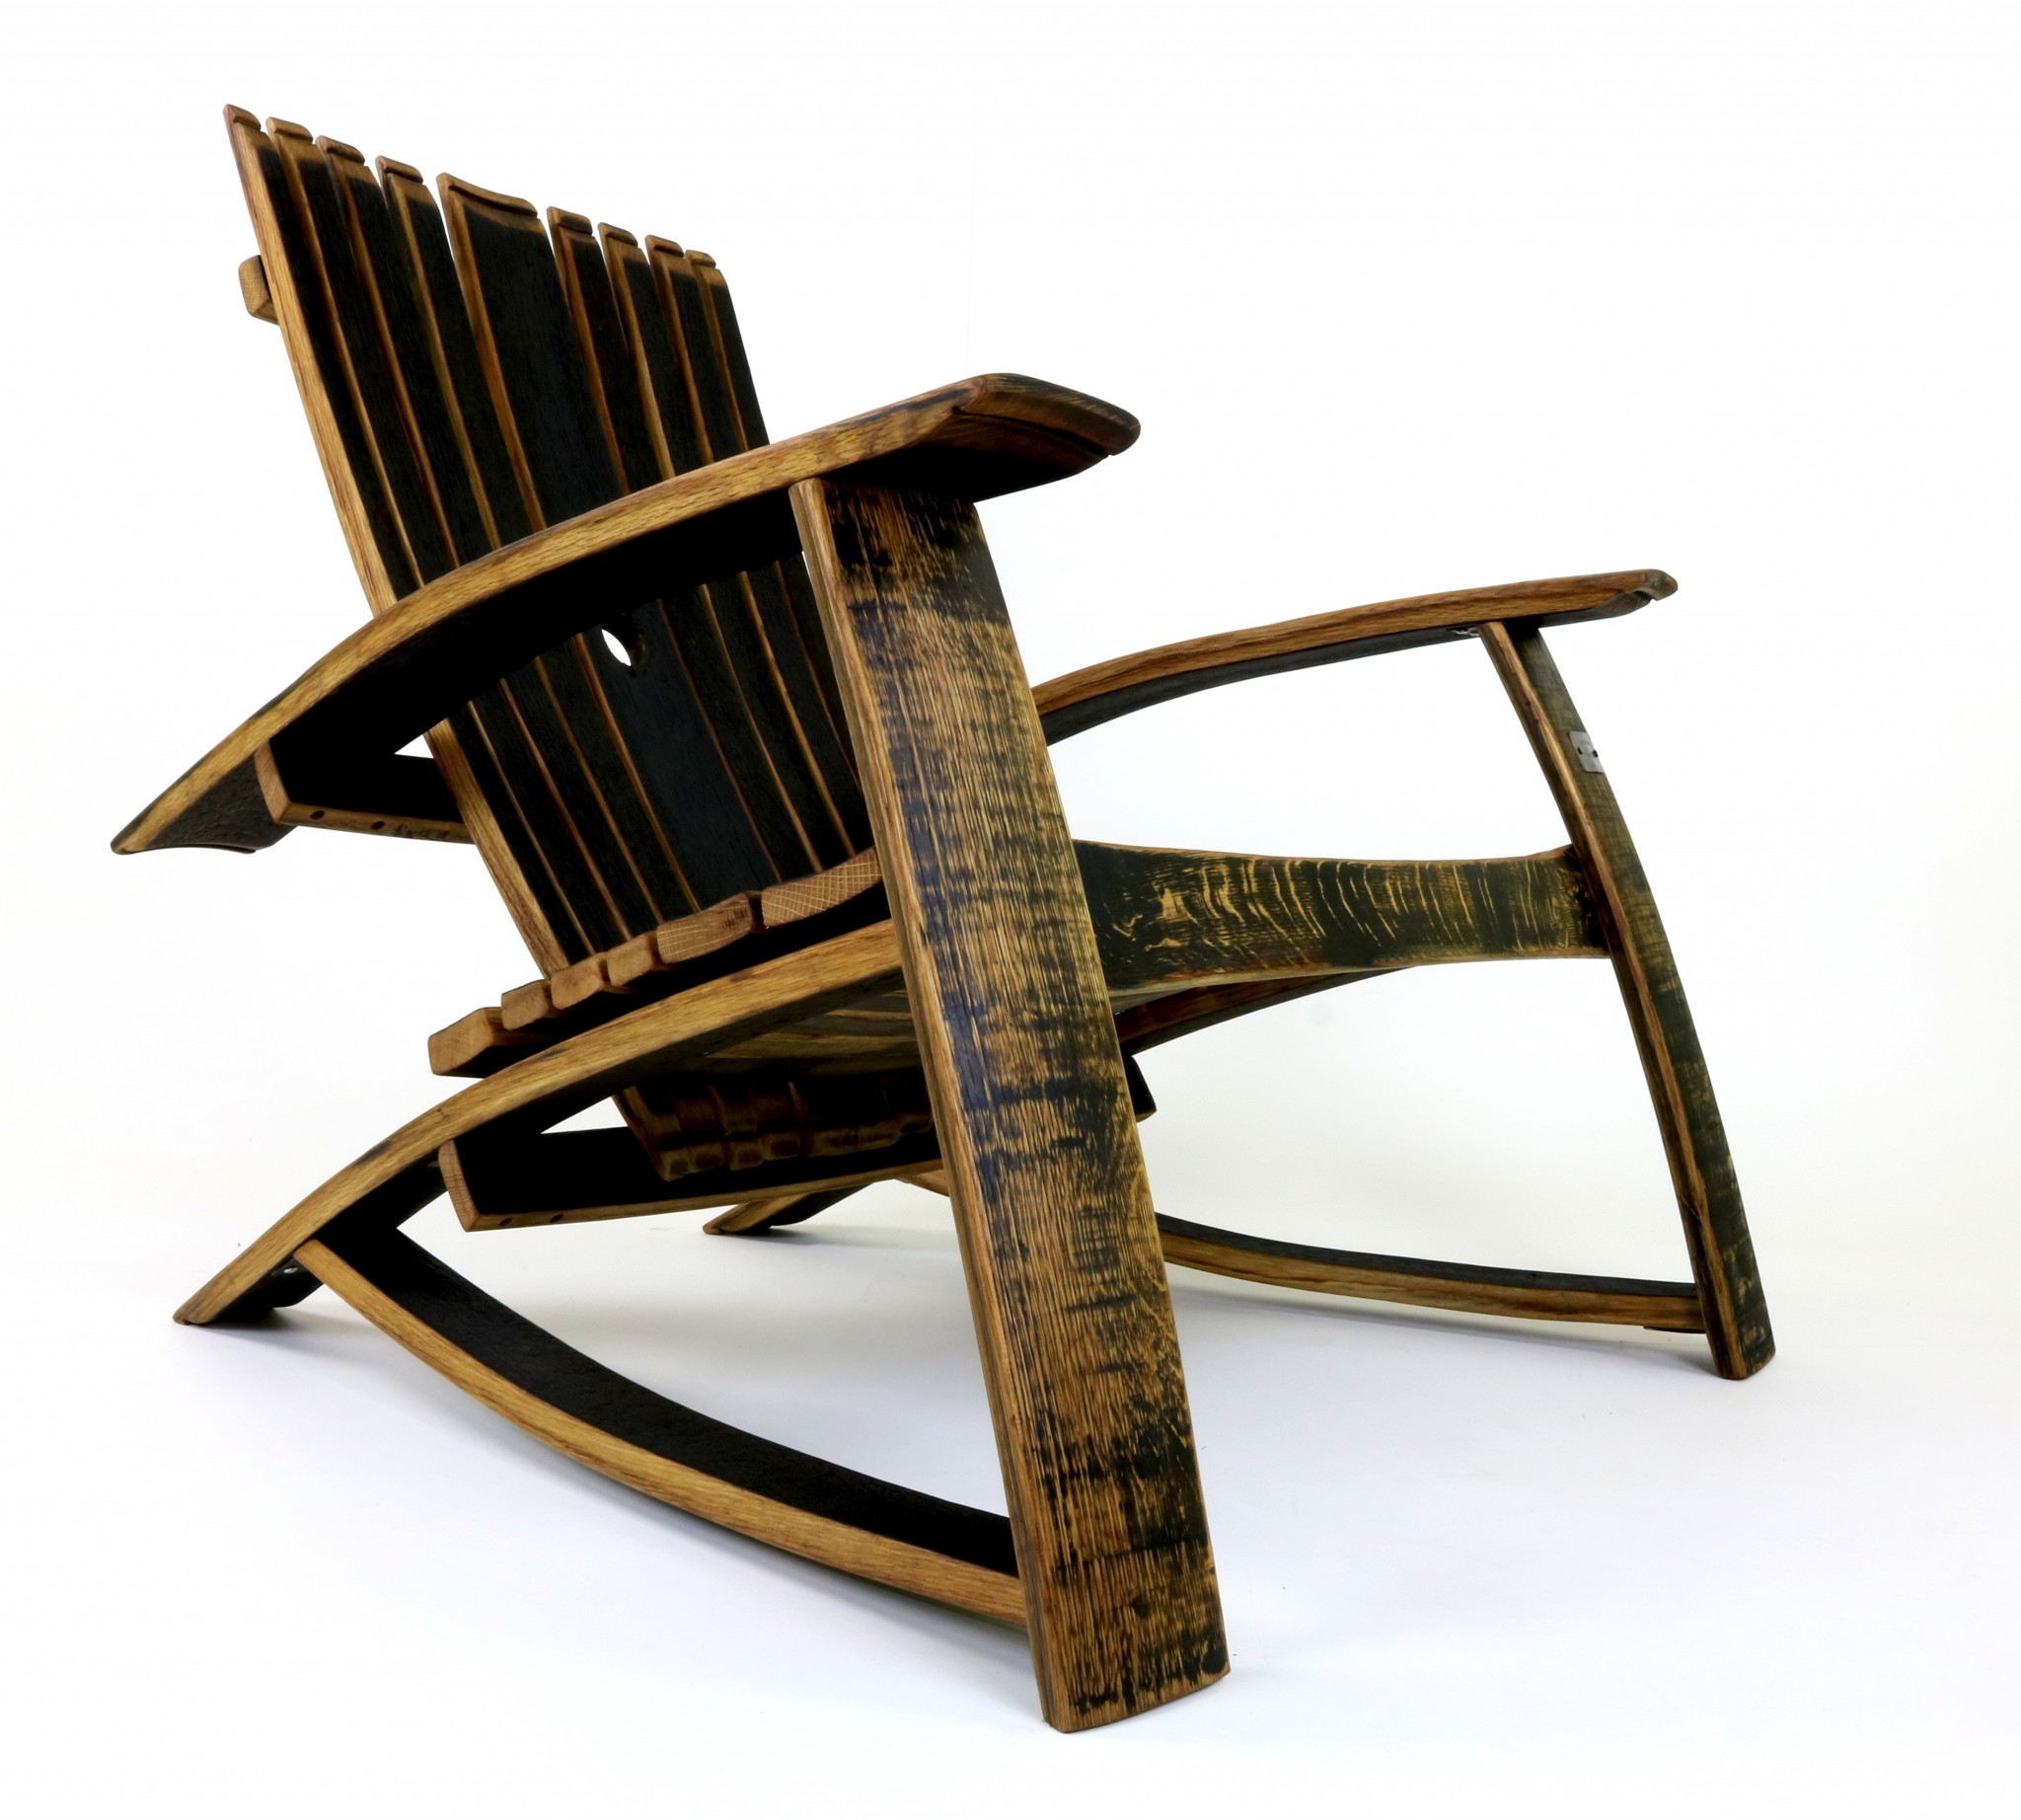 Bourbon Barrel Lounge Chairs By Hungarian Workshop